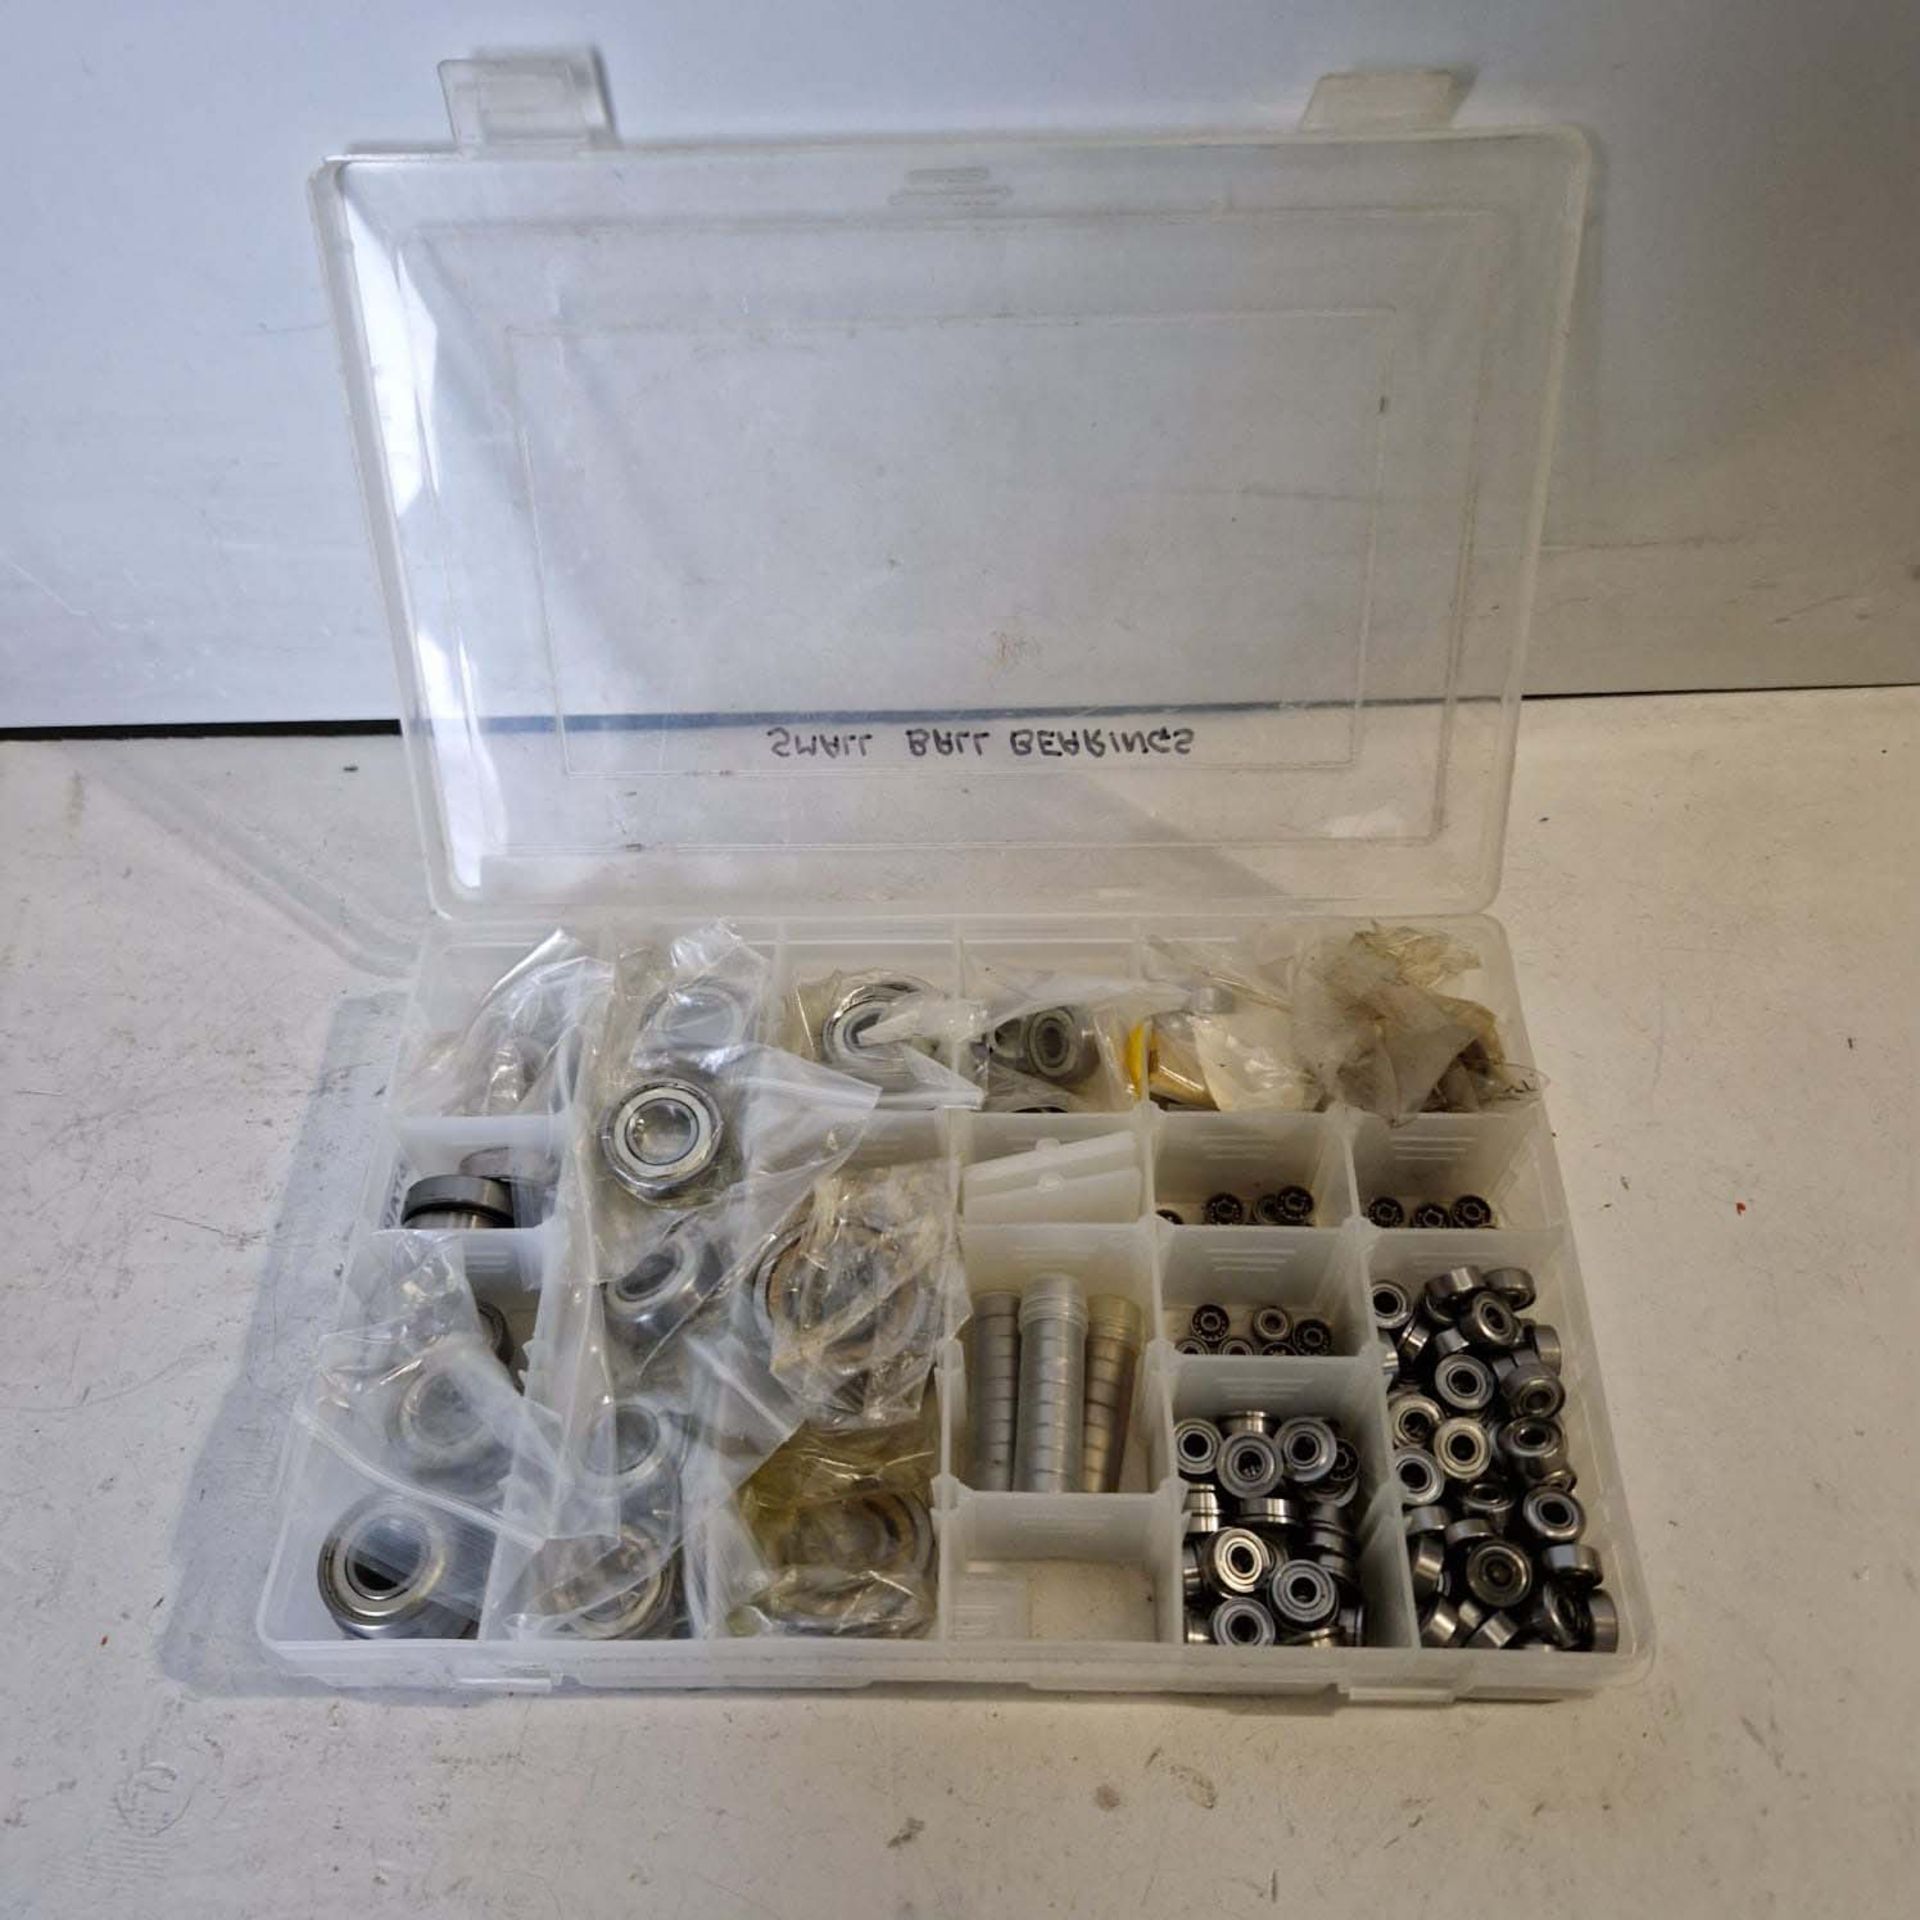 Quantity of Various Roller Ball Bearings in Plastic Tray.